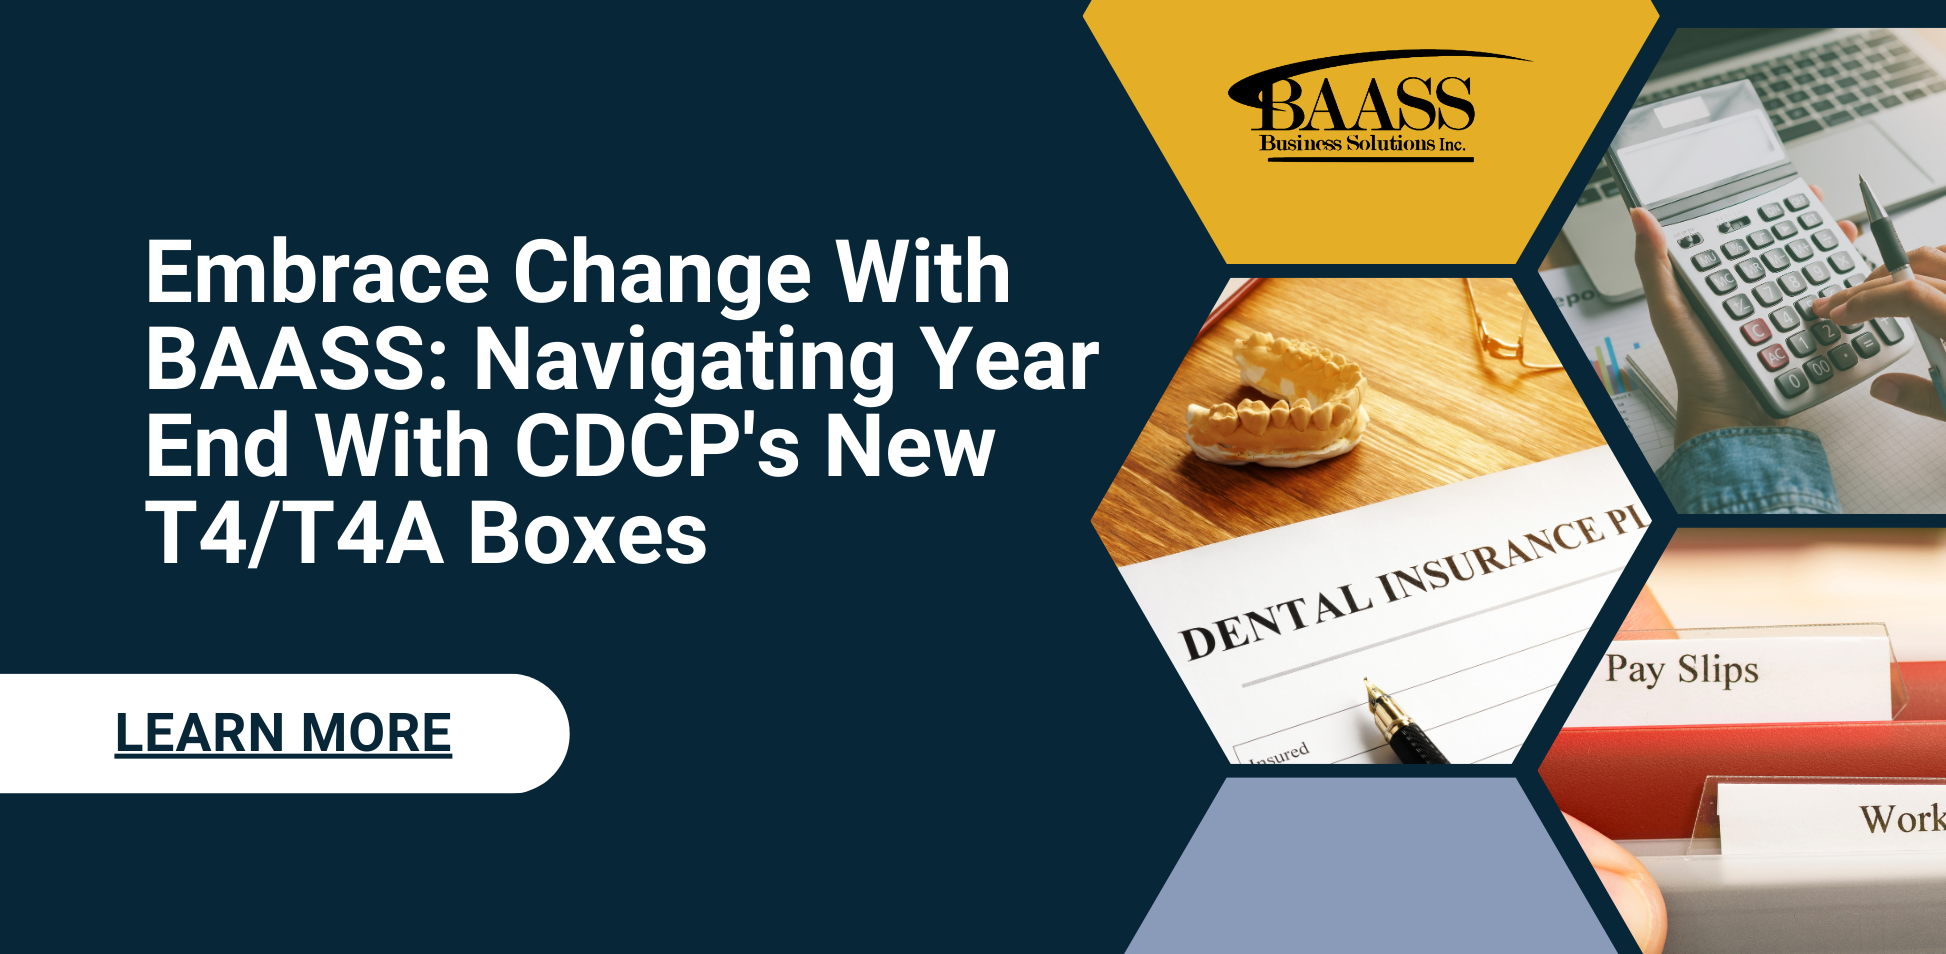 Embrace Change with BAASS Navigating Year End with CDCP New T4/T4A Boxes